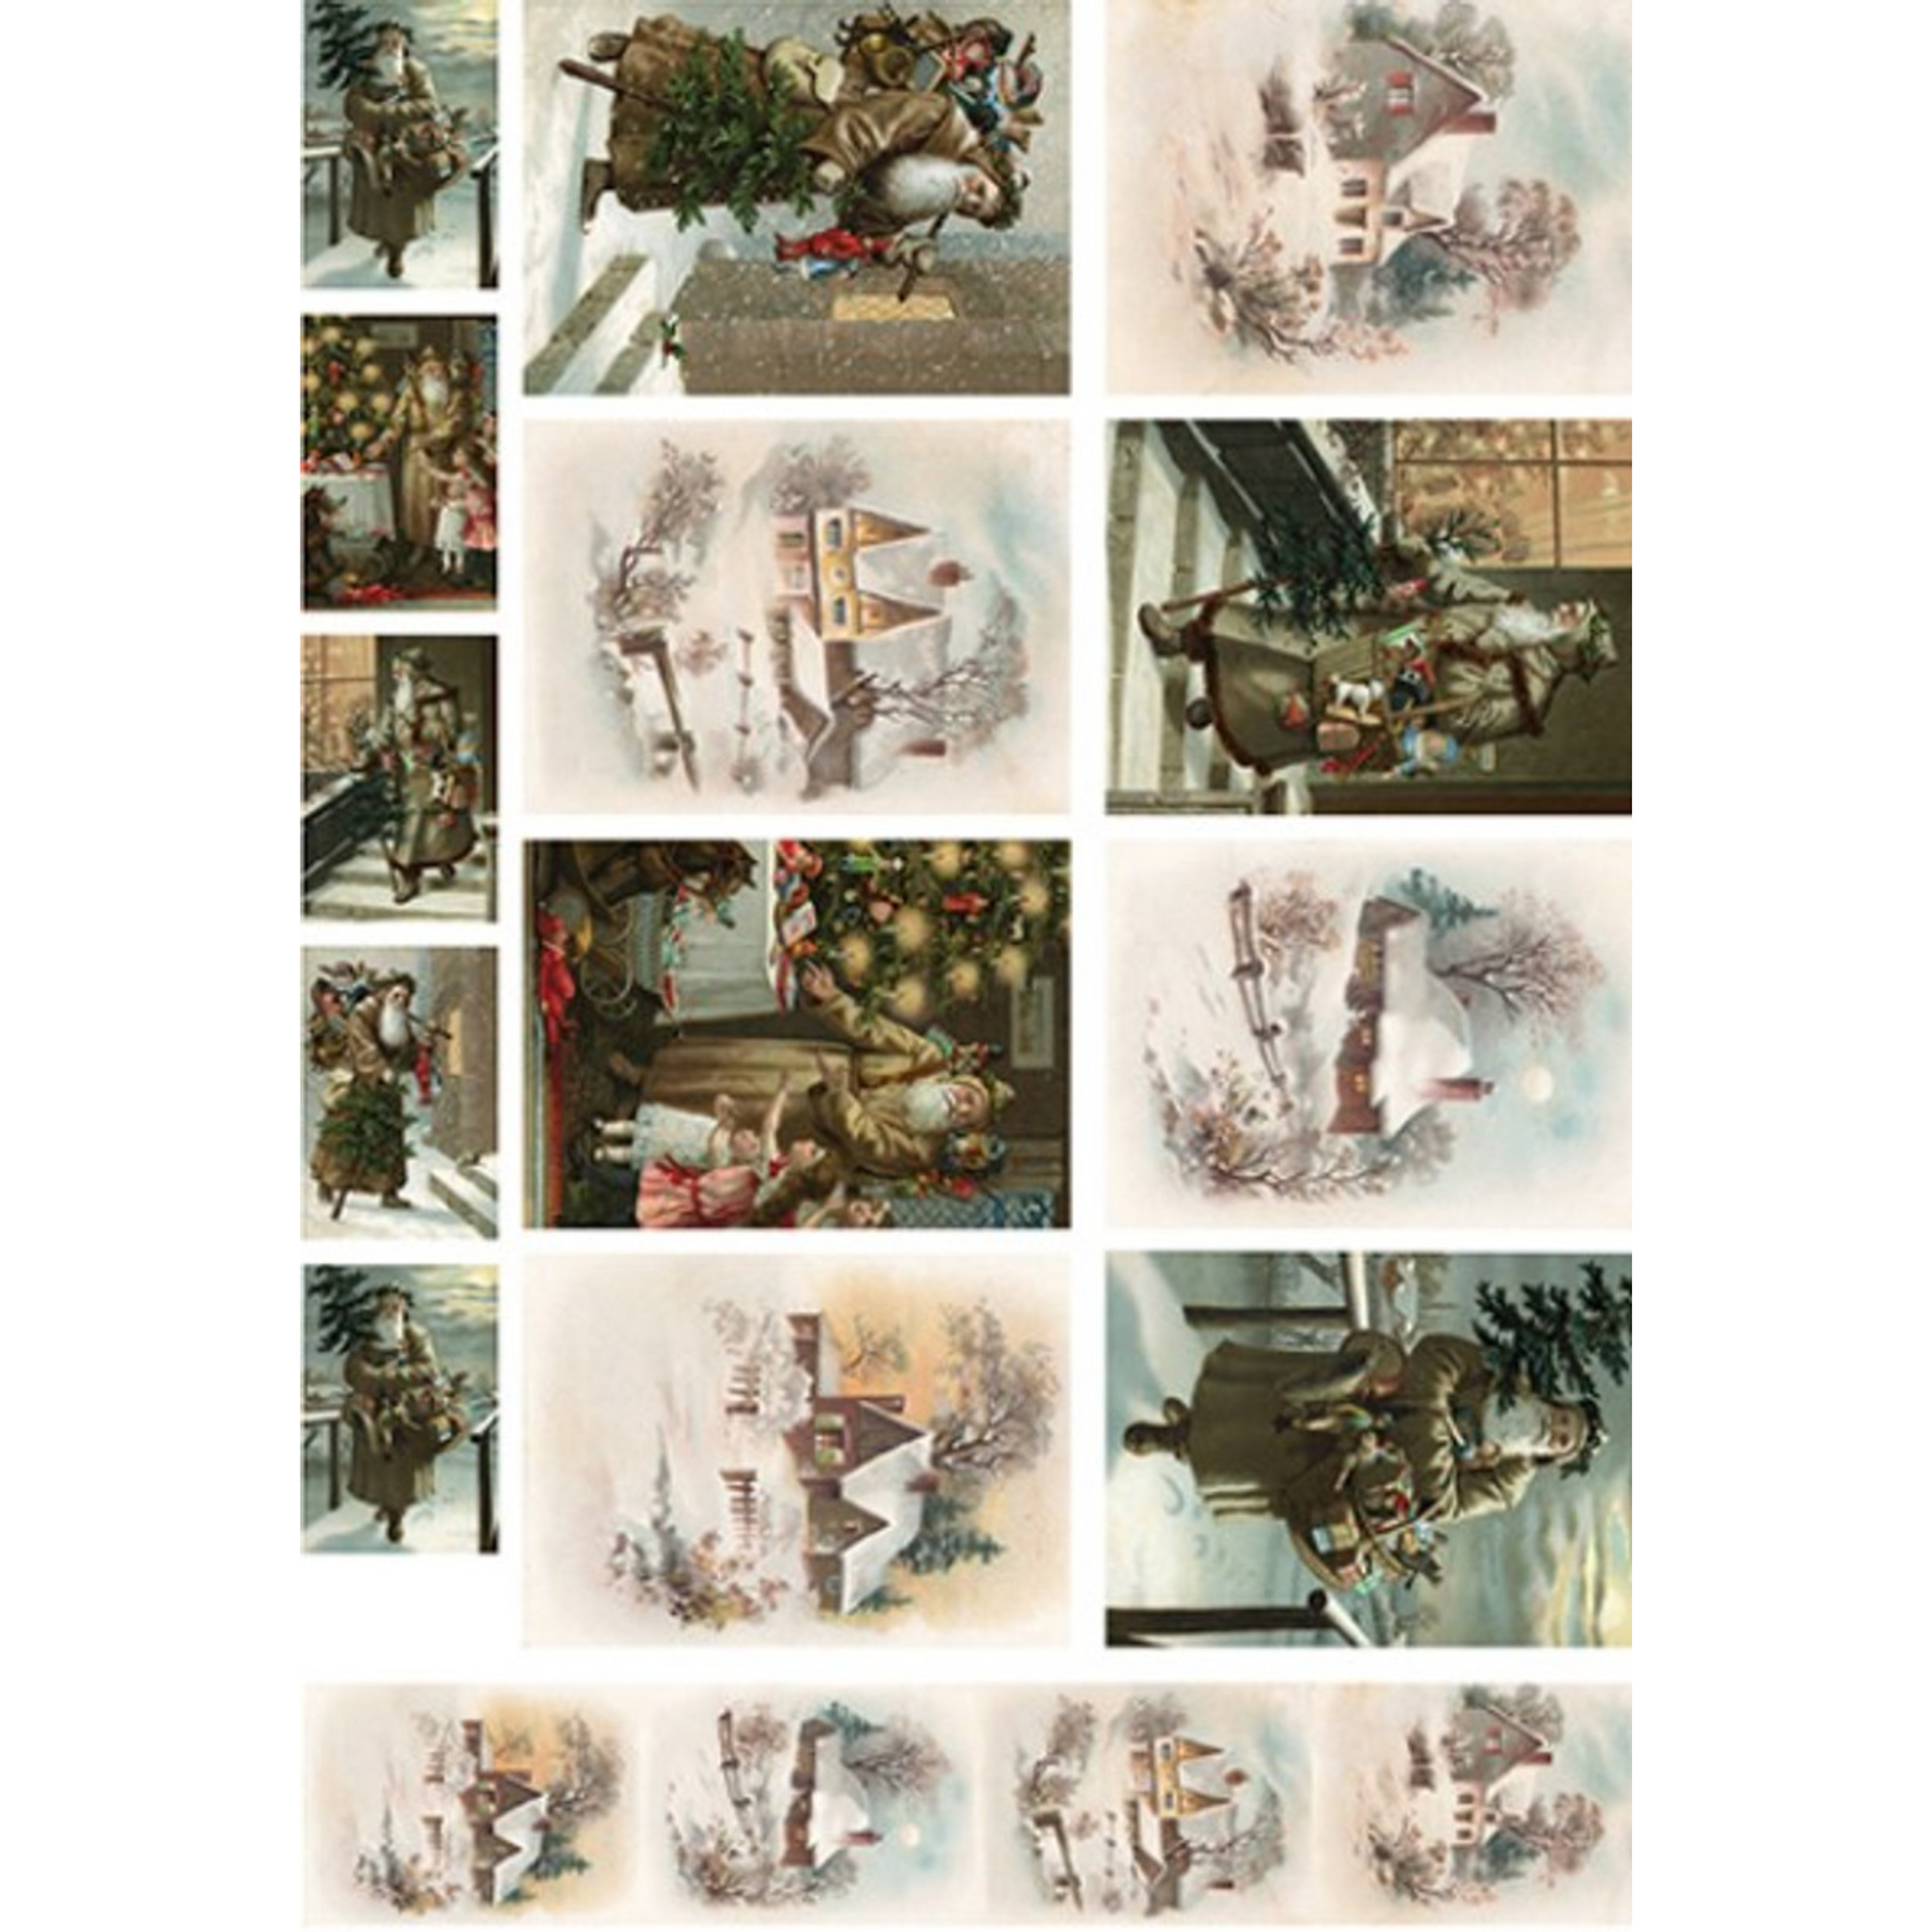 "Vintage Santas and Snowy Houses" decoupage rice paper by Calambour. Available at Milton's Daughter.